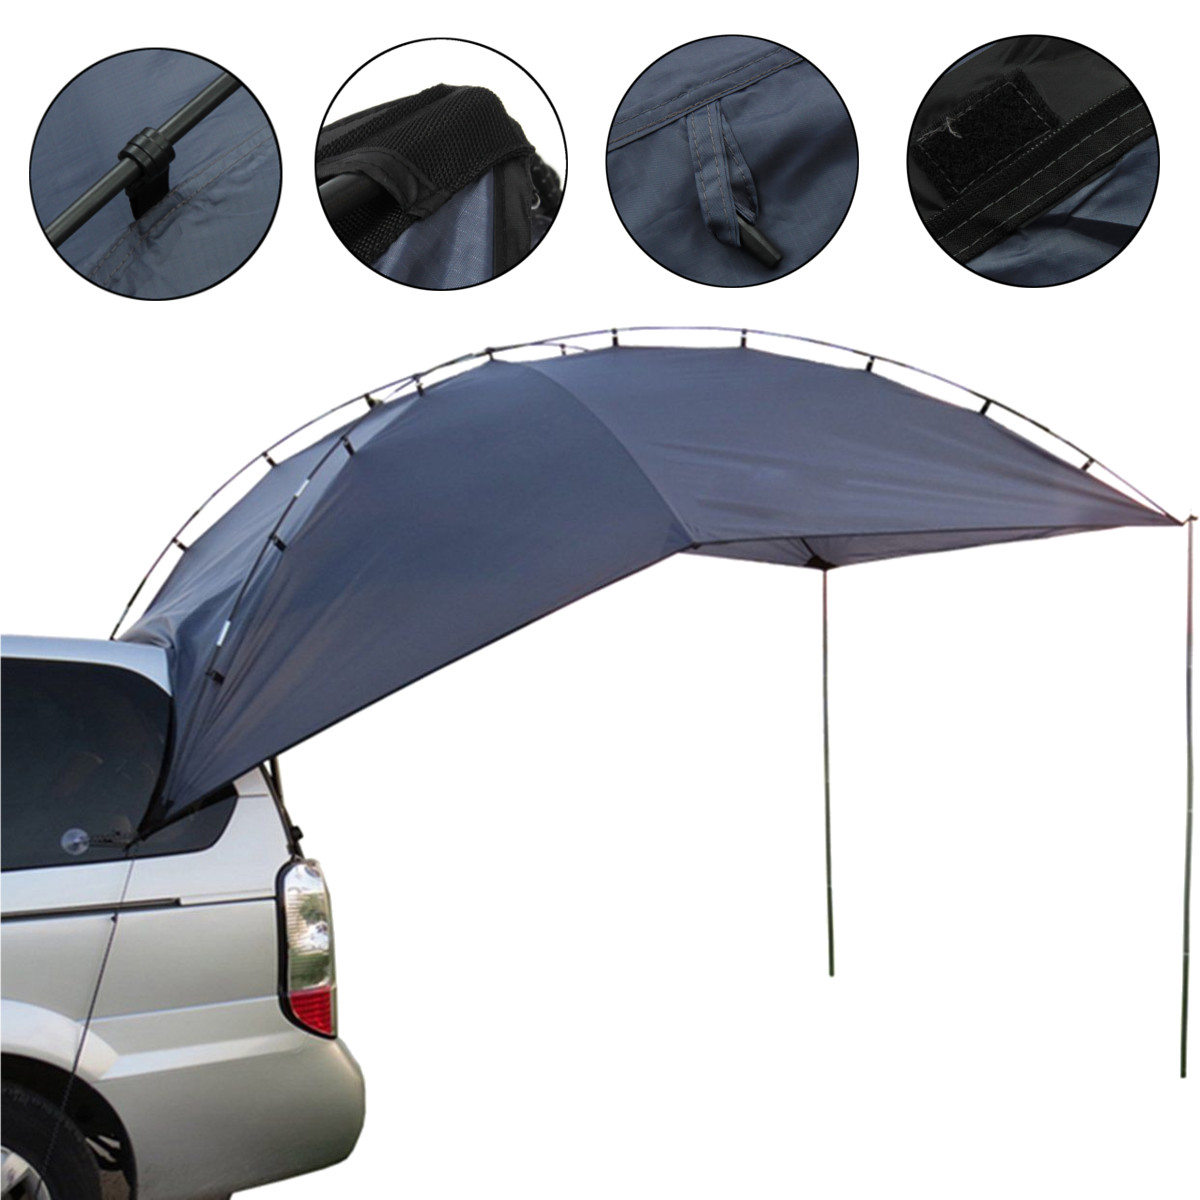 

Outdoor Camping 4 People SUV Shelter Truck Car Trailer Tent Waterproof UV Canopy Sunshade